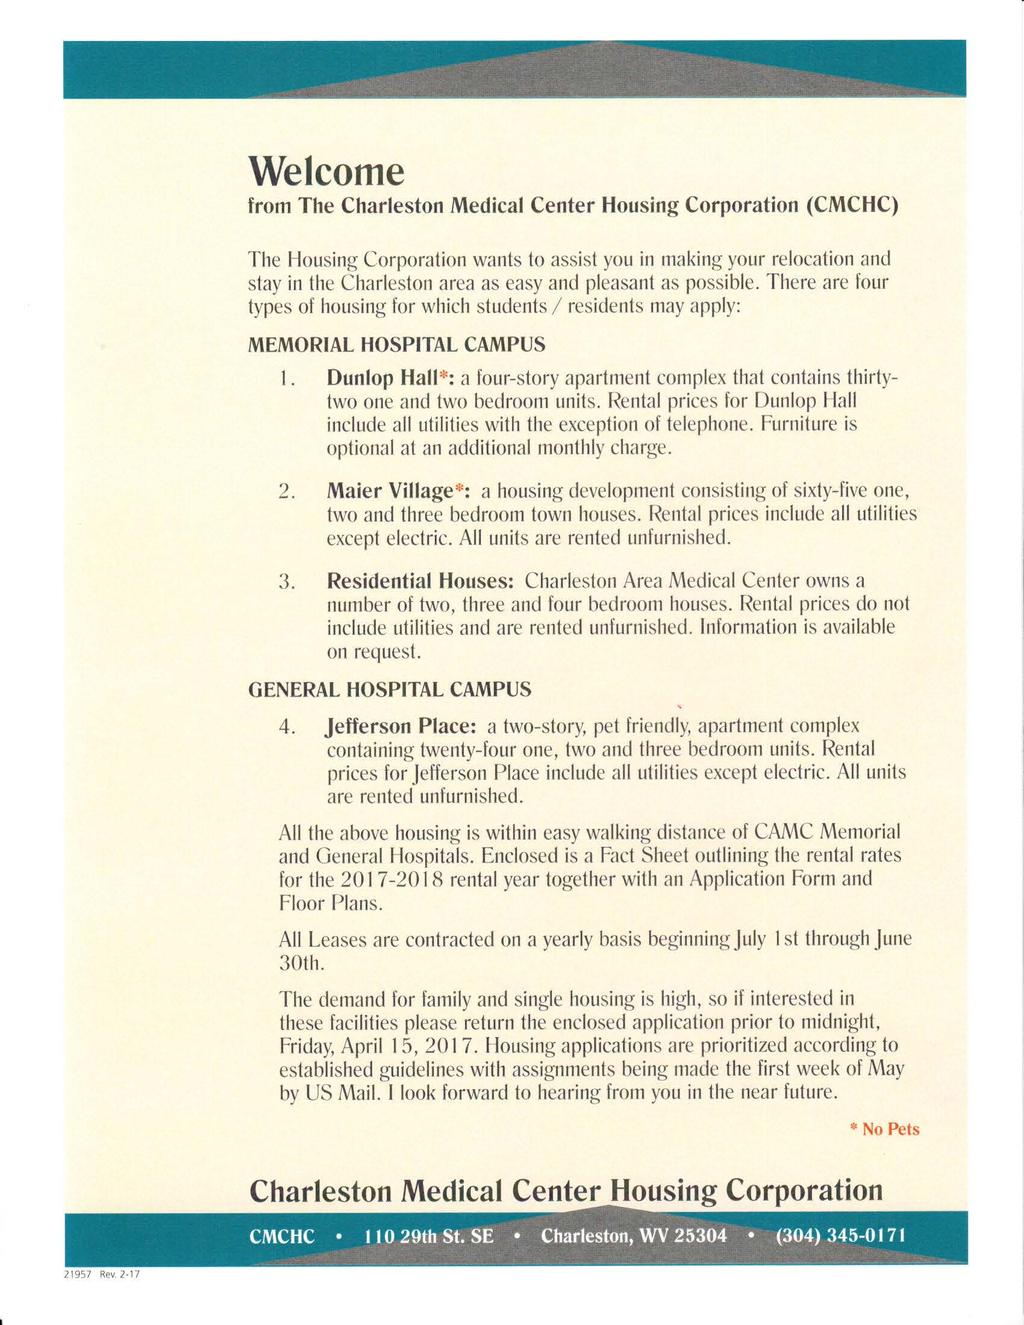 Welcome from The (CMCHC) The Housing Corporation wants to assist you in making your relocation and stay in the Charleston area as easy and pleasant as possible.